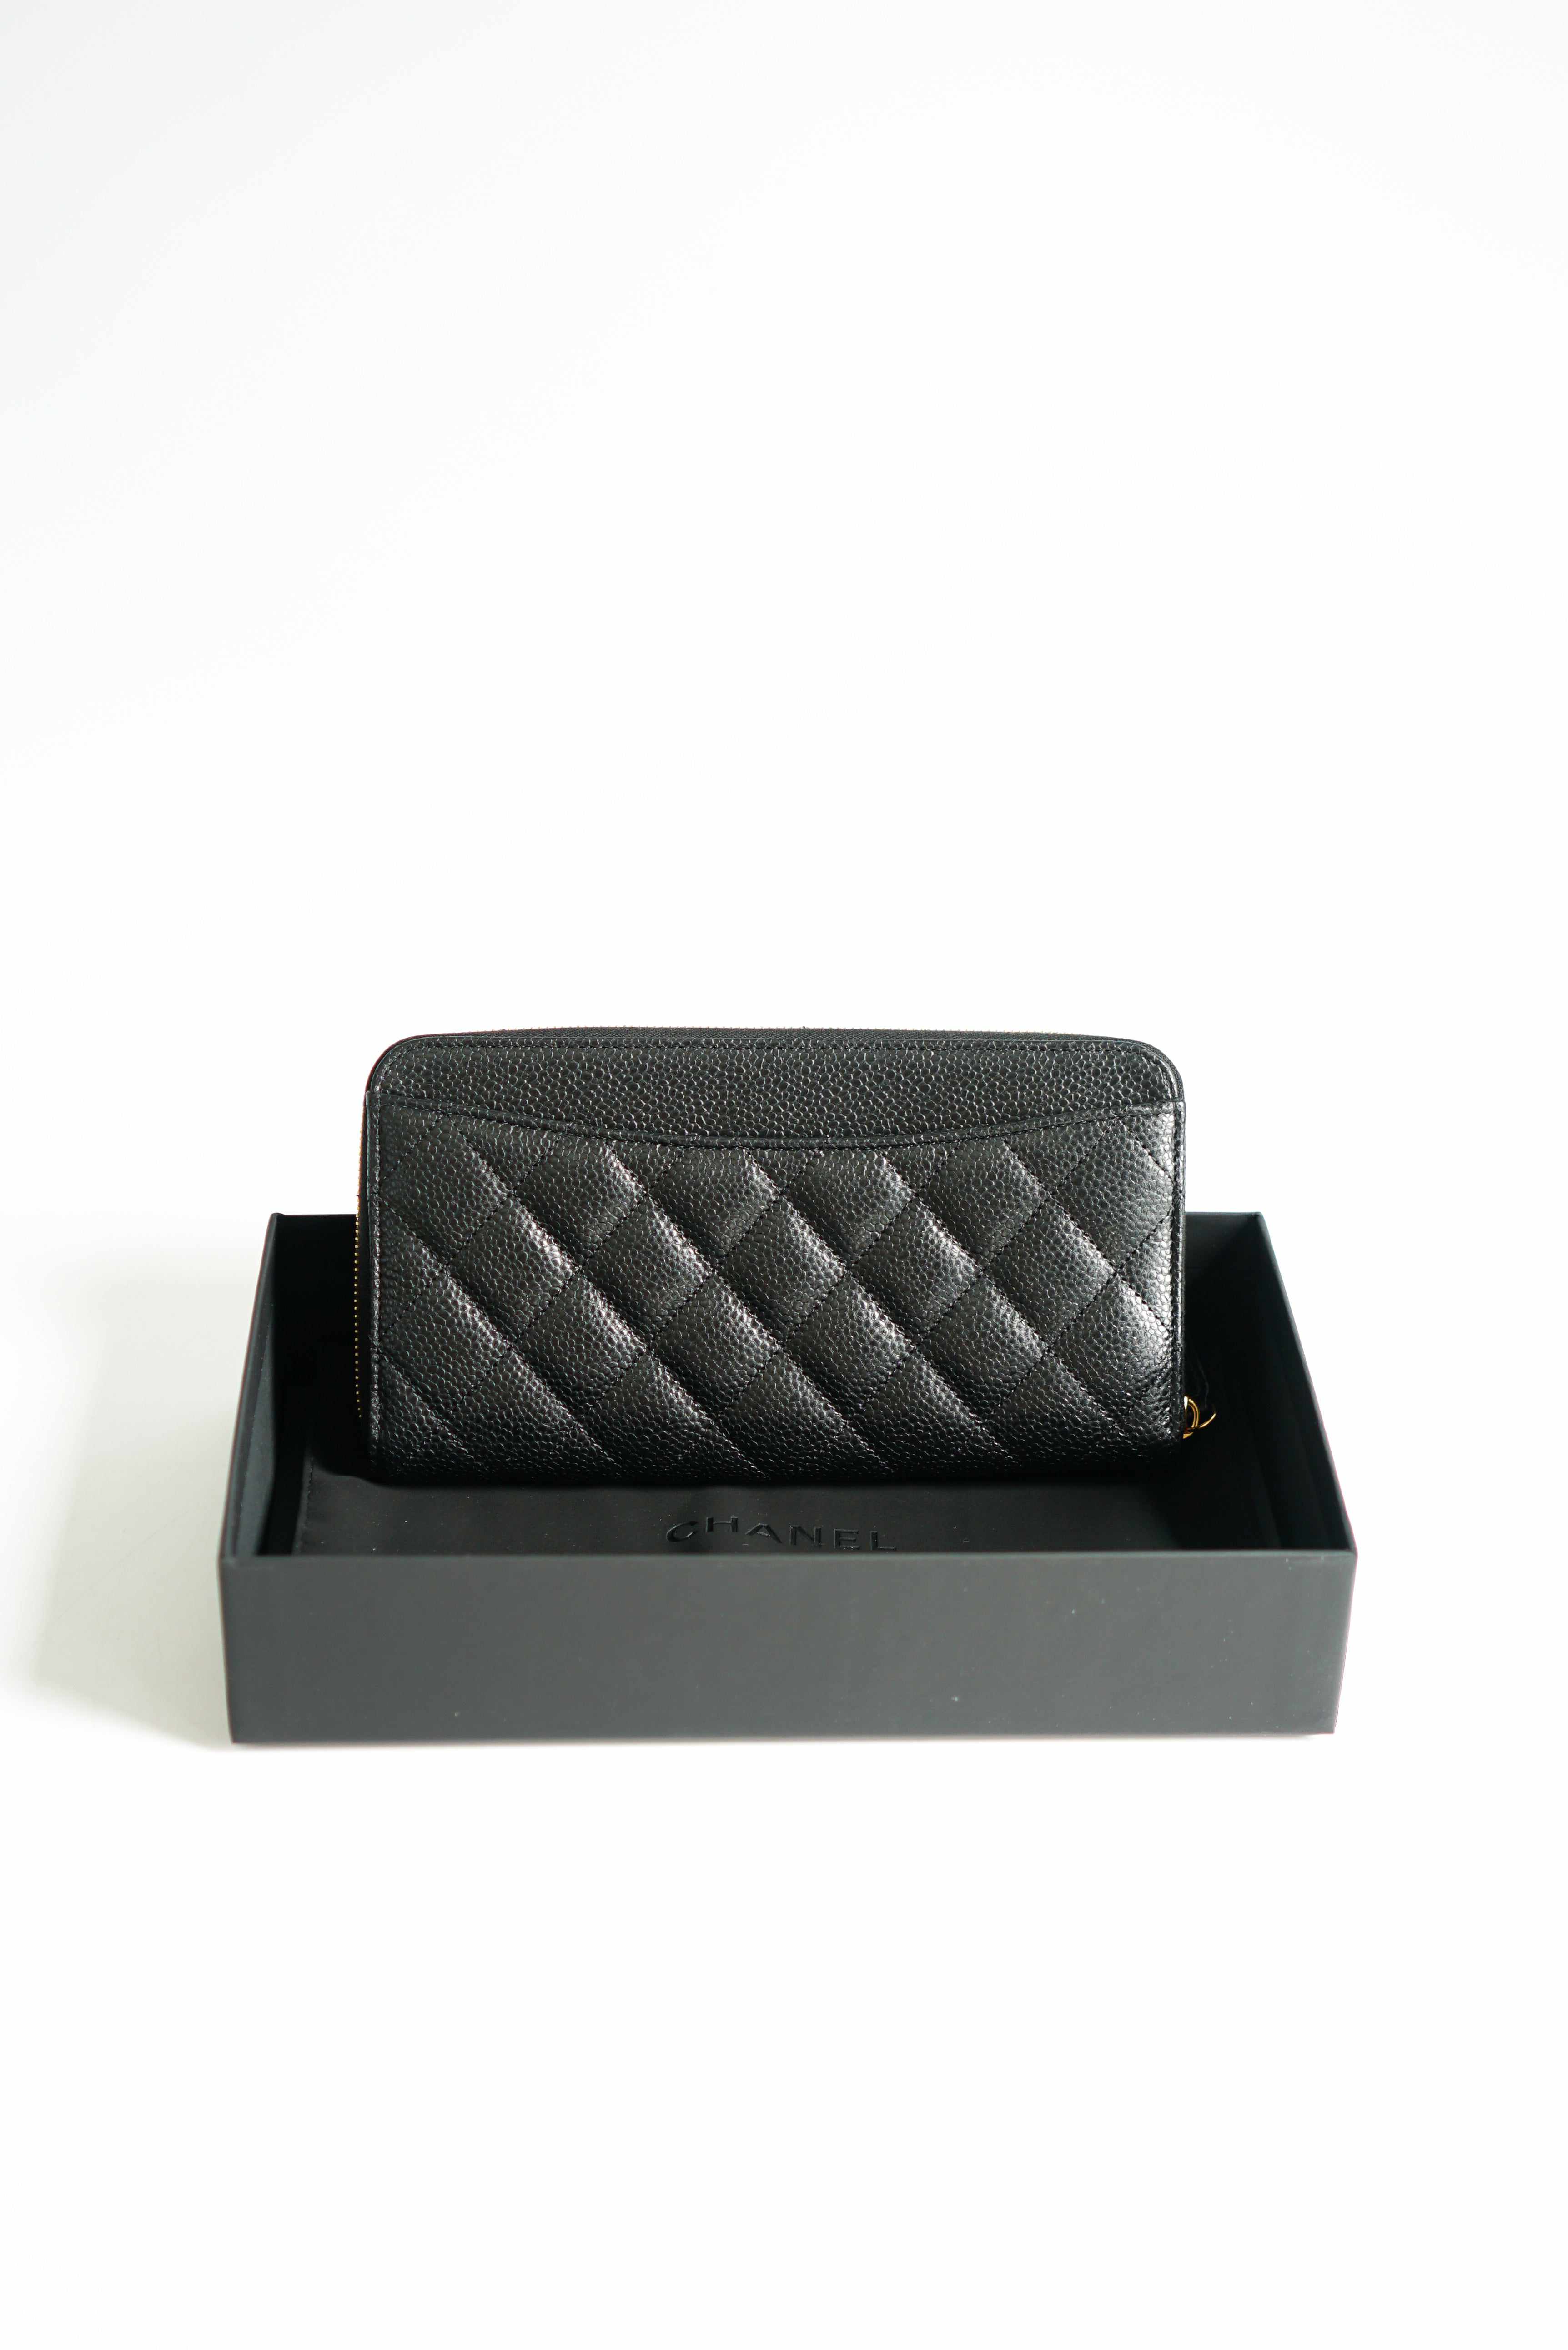 Chanel Classic Long Zipped Wallet Black Caviar Leather 